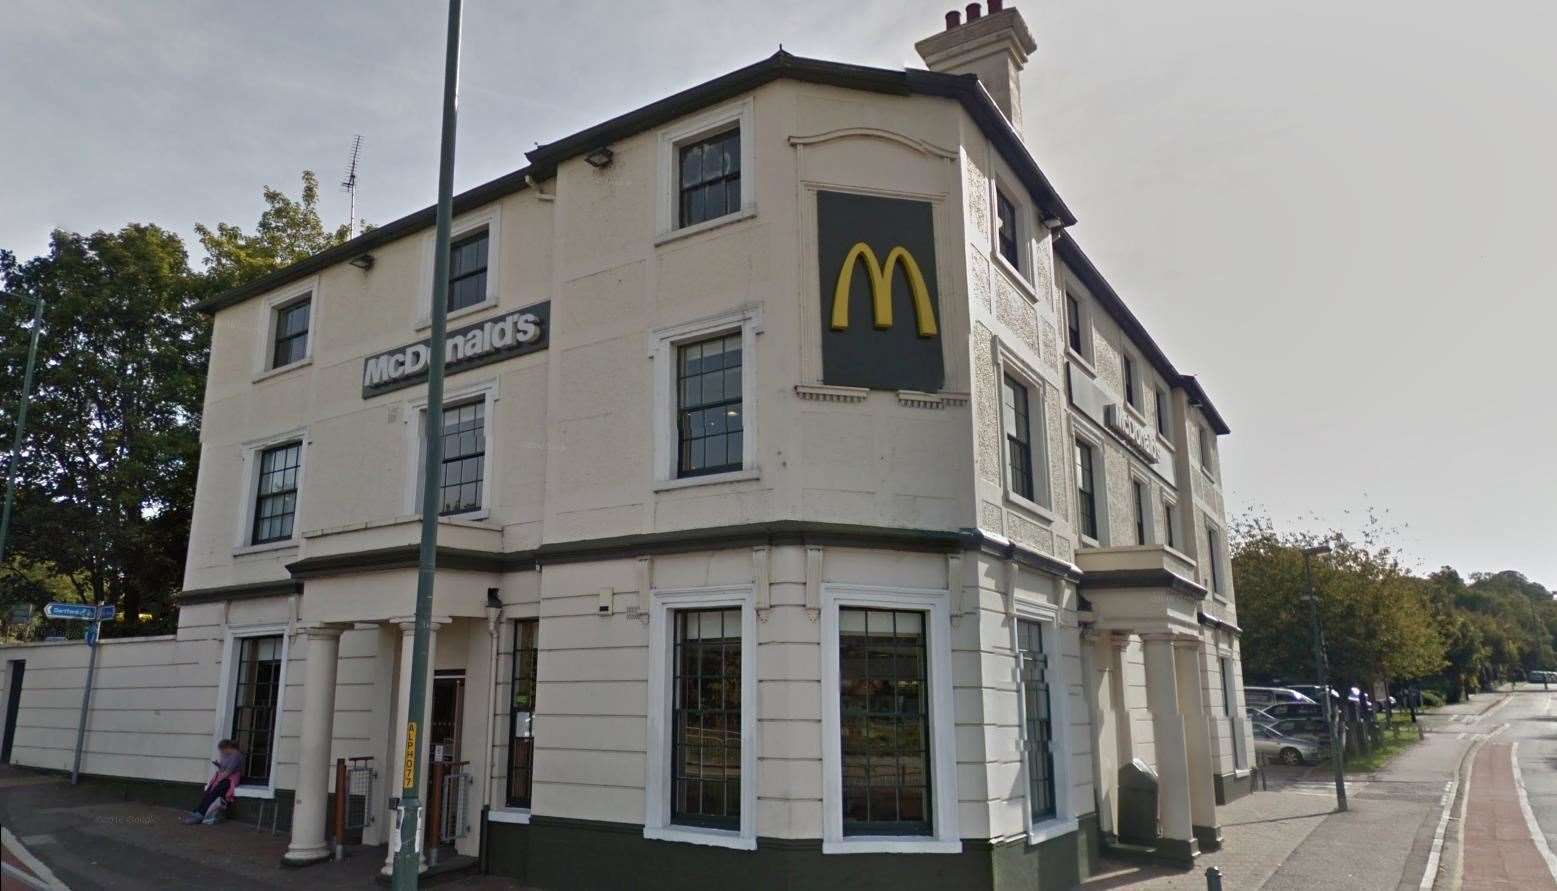 The McDonalds Restaurant in Greenhithe is set to get a new drive thru extension